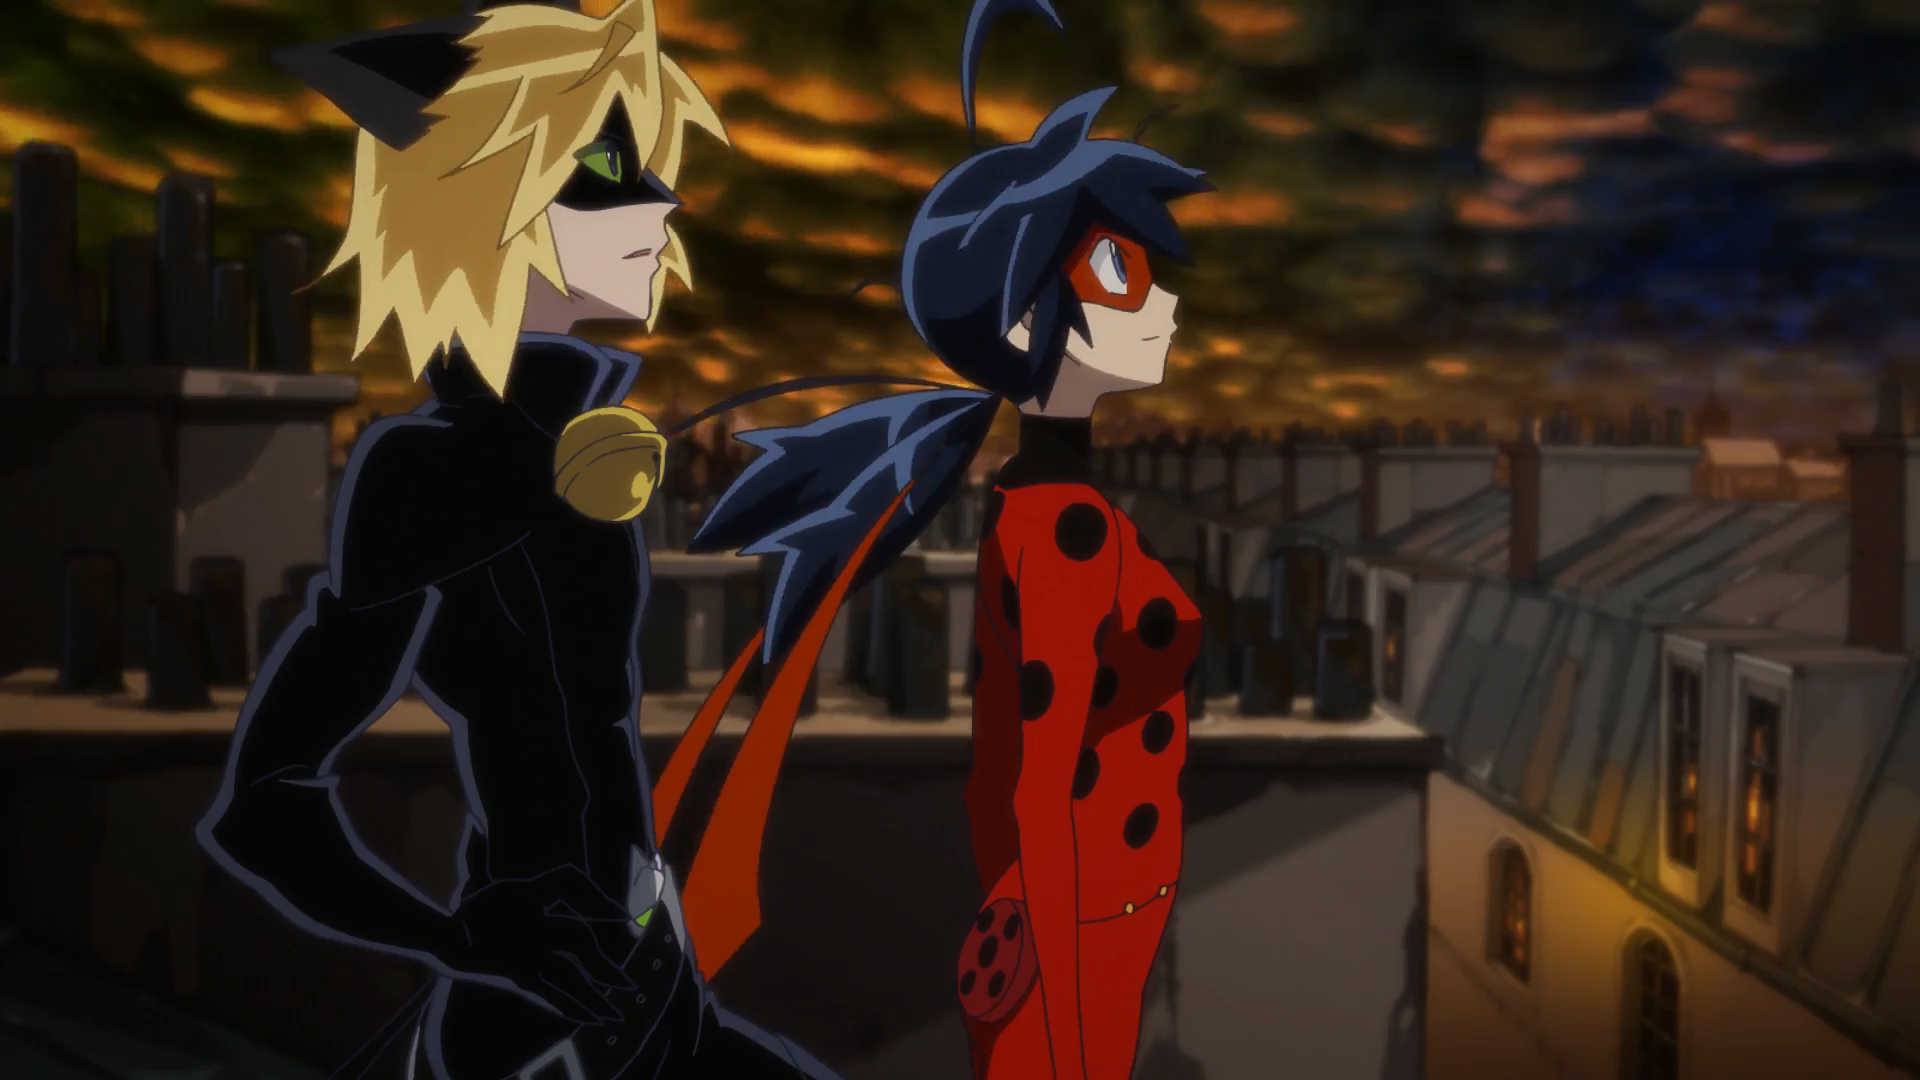 FIRST OFFICIAL MIRACULOUS LADYBUG TRAILER: THE MOVIE!! 